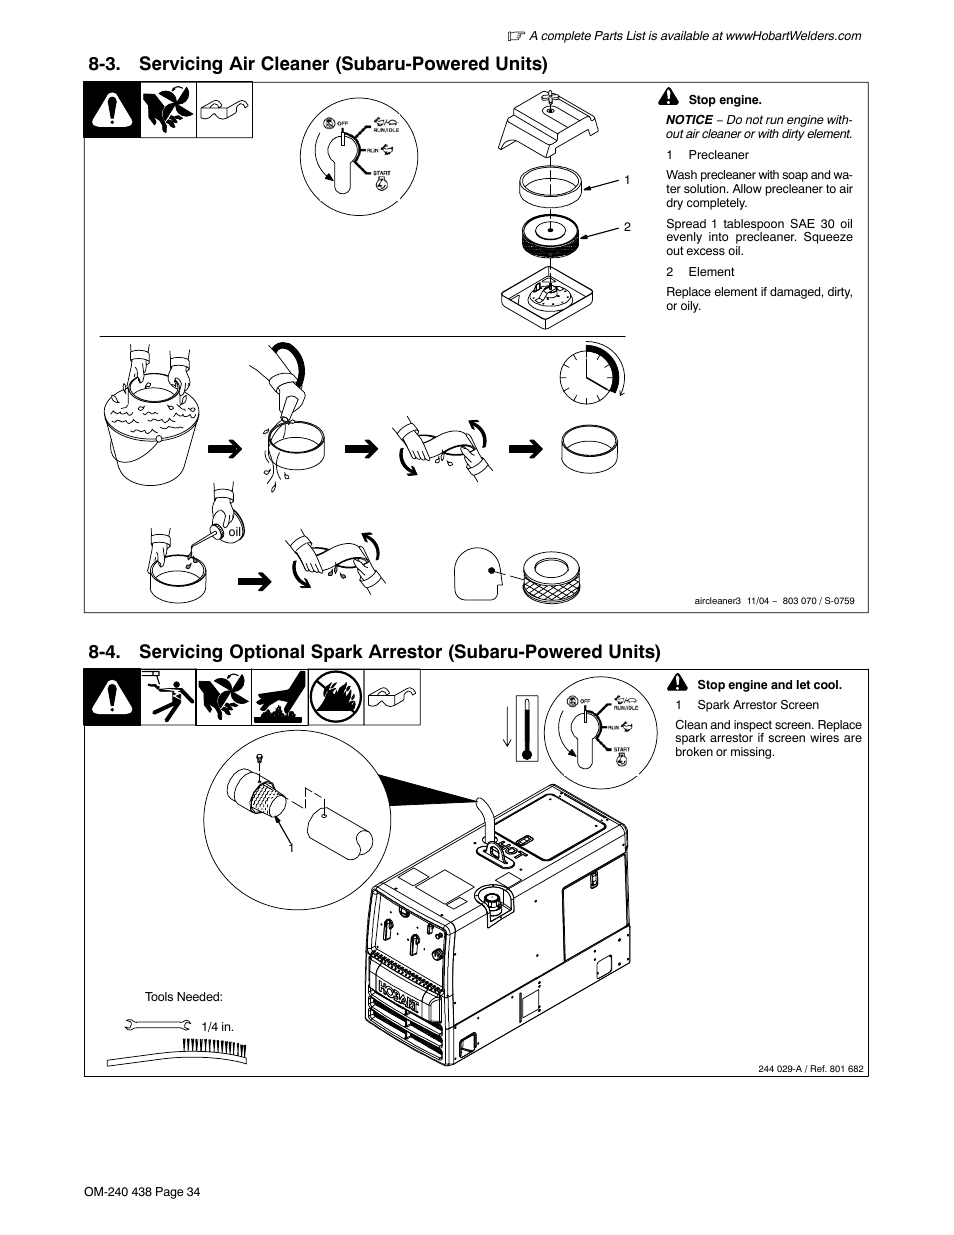 3. servicing air cleaner (subaru-powered units), Section 8-4, Section 8-3 | Hobart Welding Products CHAMPION ELITE OM-240 438B User Manual | Page 38 / 72